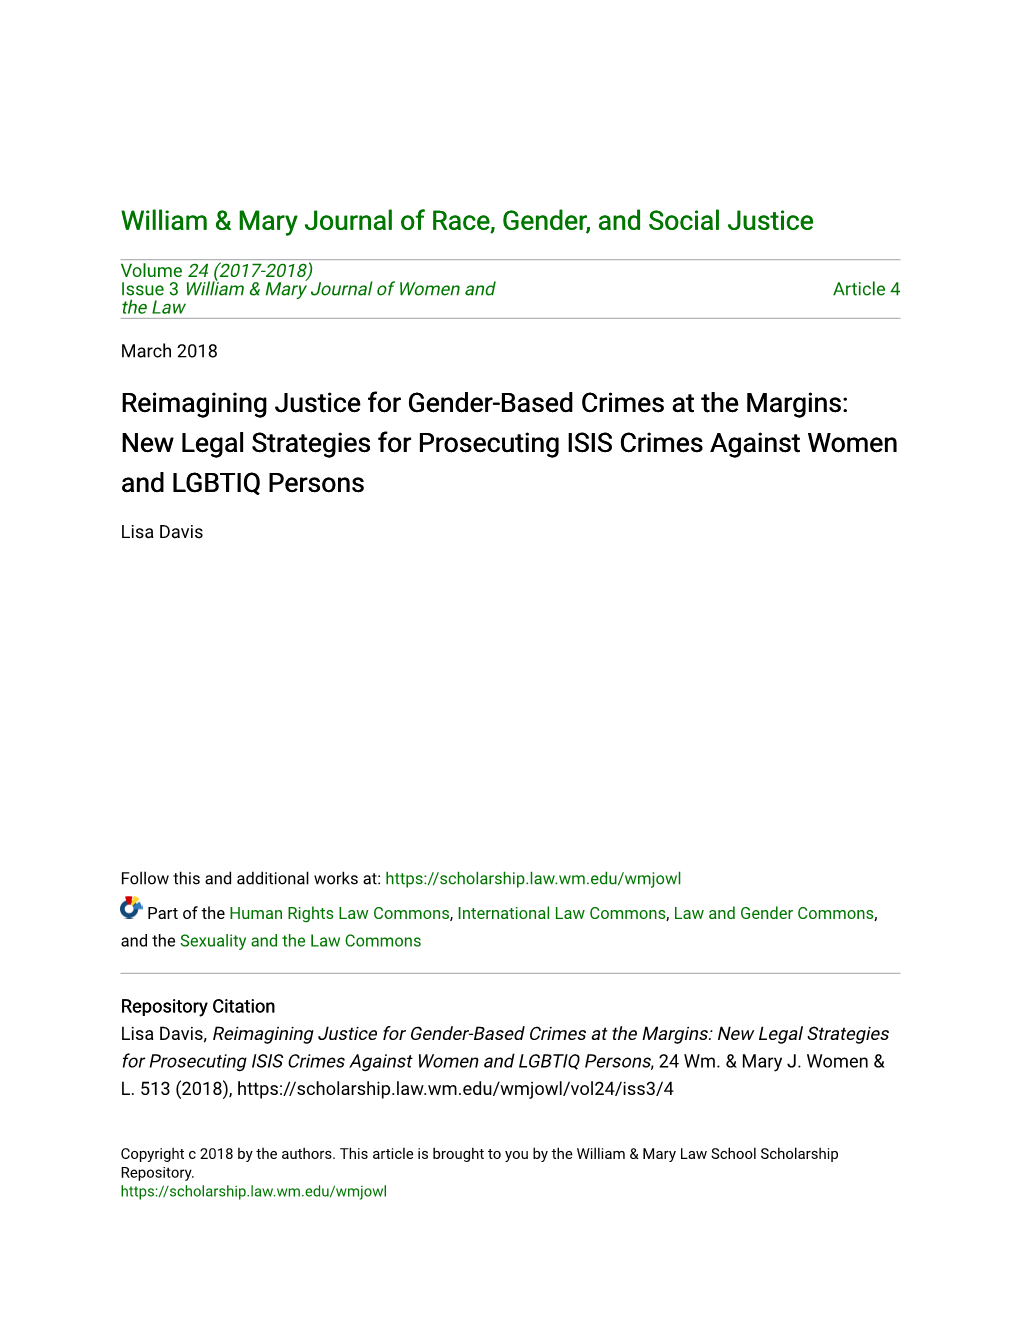 New Legal Strategies for Prosecuting ISIS Crimes Against Women and LGBTIQ Persons